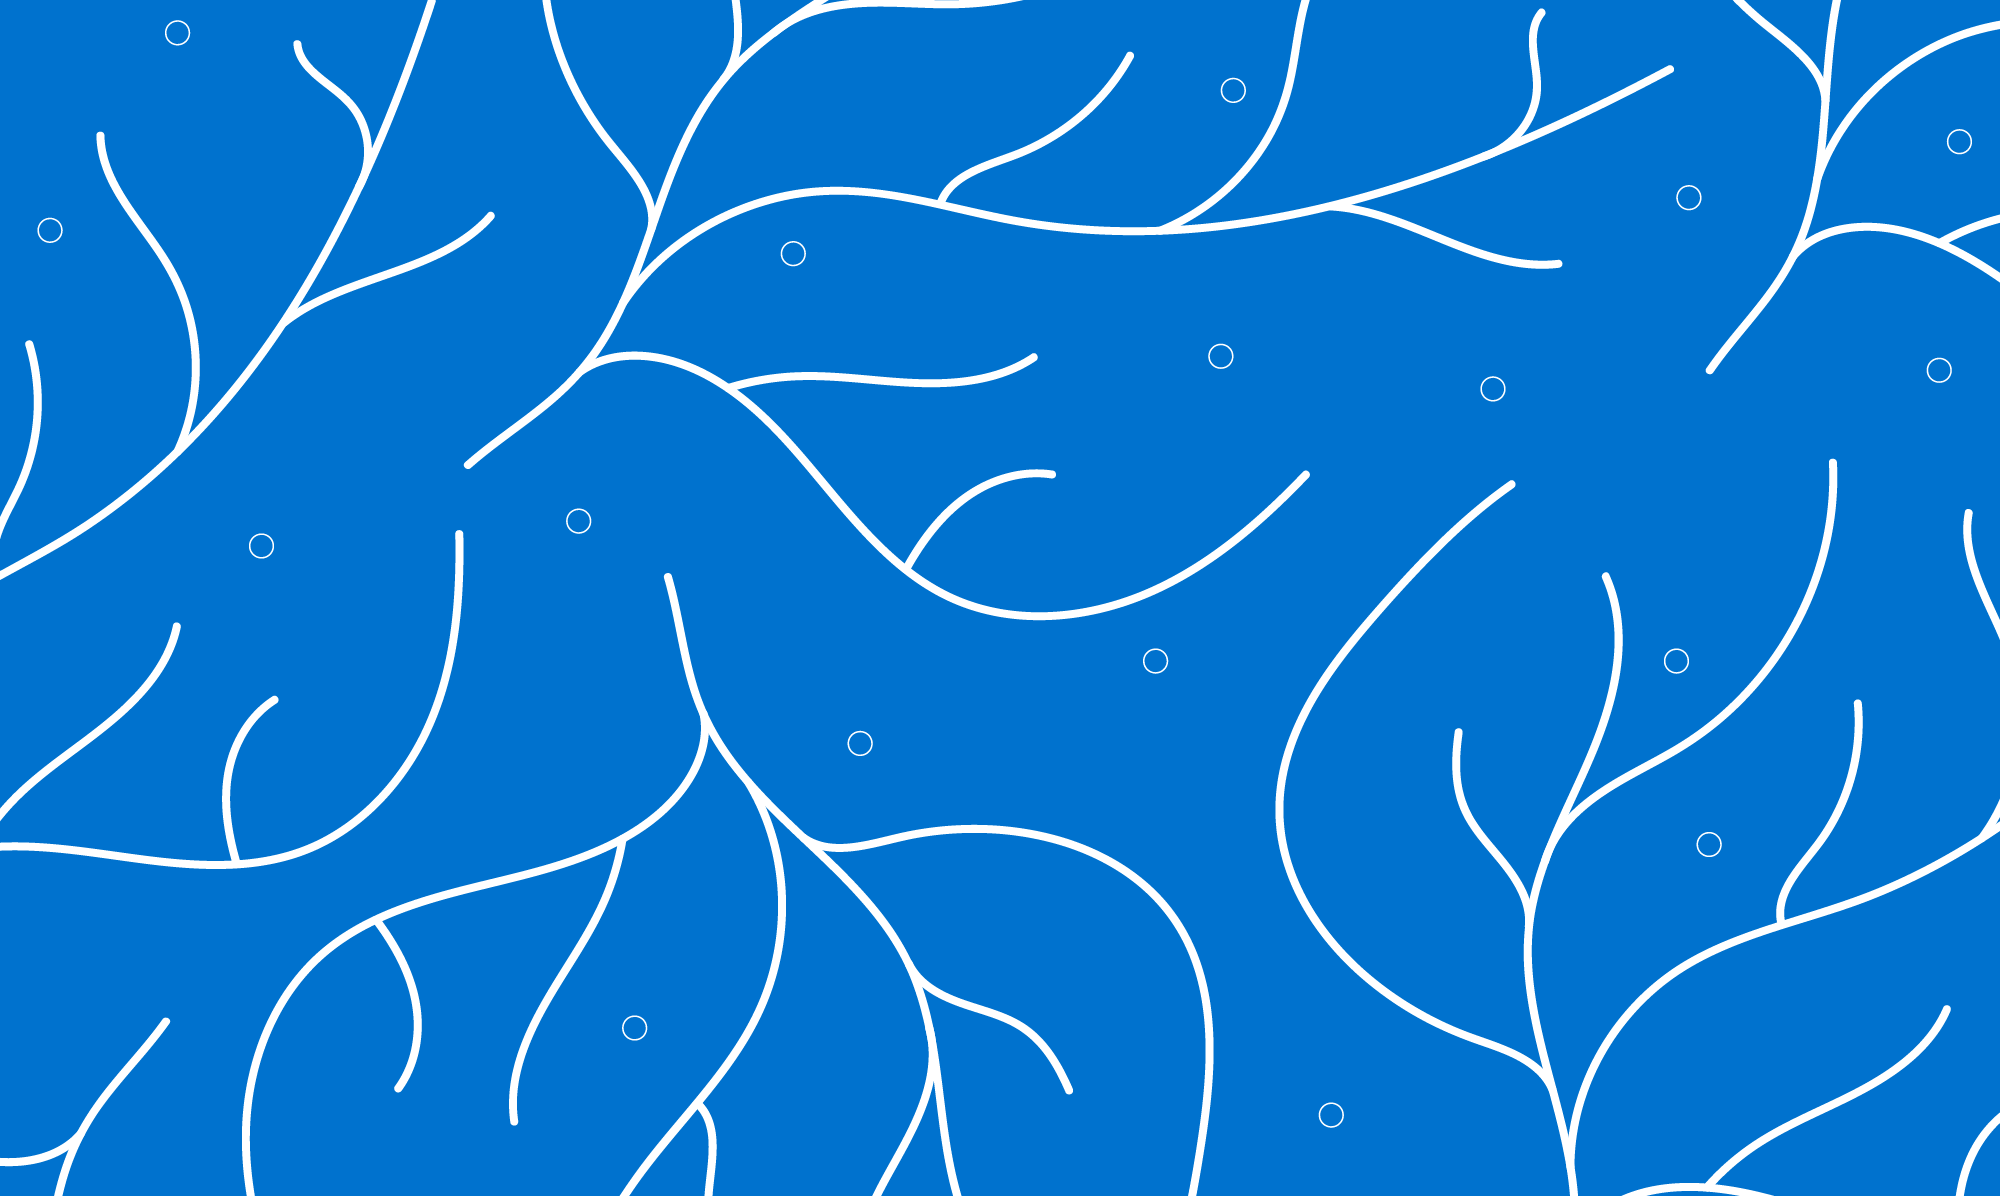 Pattern 4 - White on Blue@2000x.png